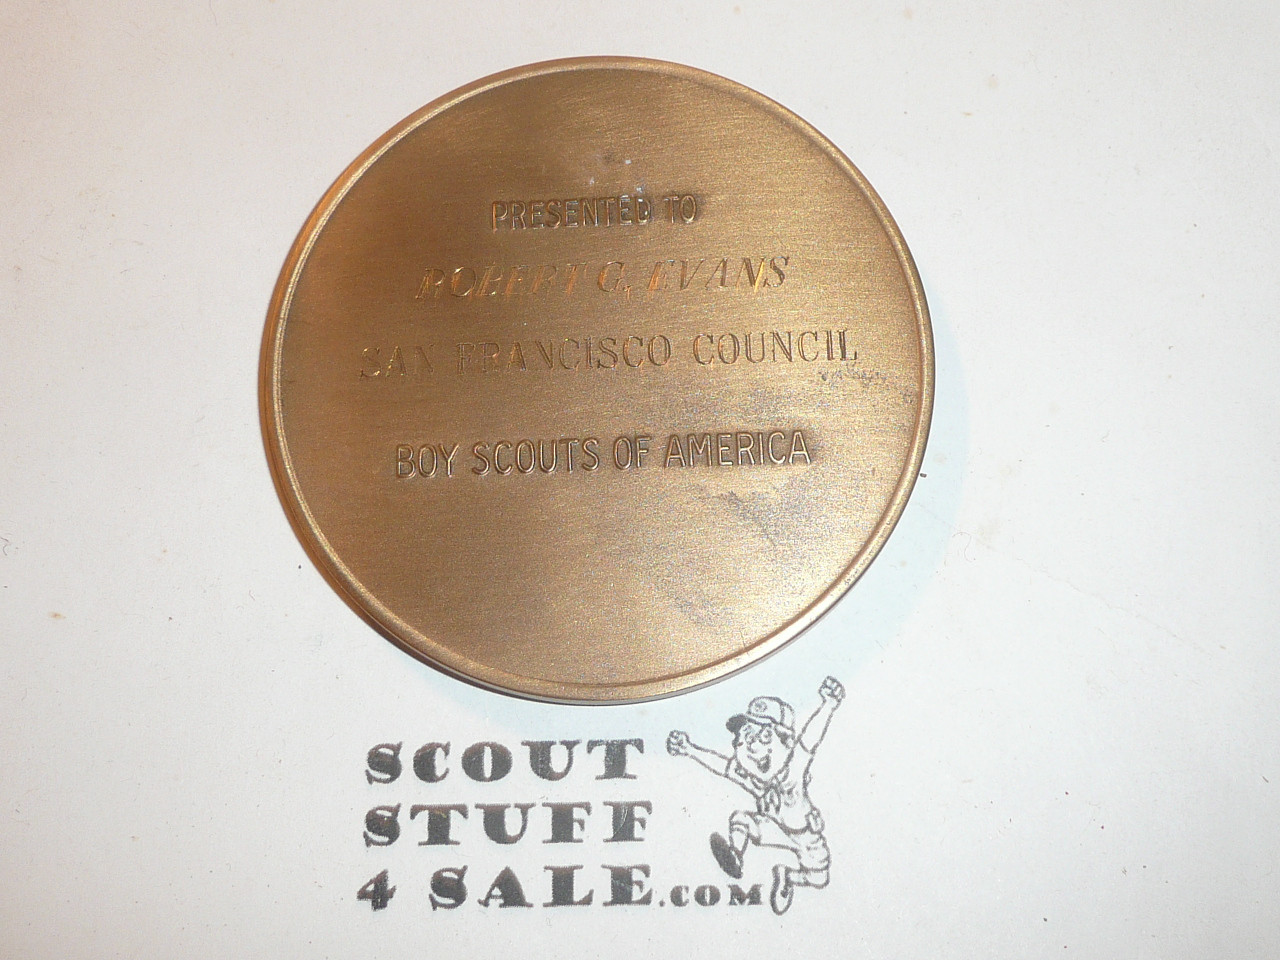 1960's Boy Scout Cast Bronze Paperweight, in box, Presented